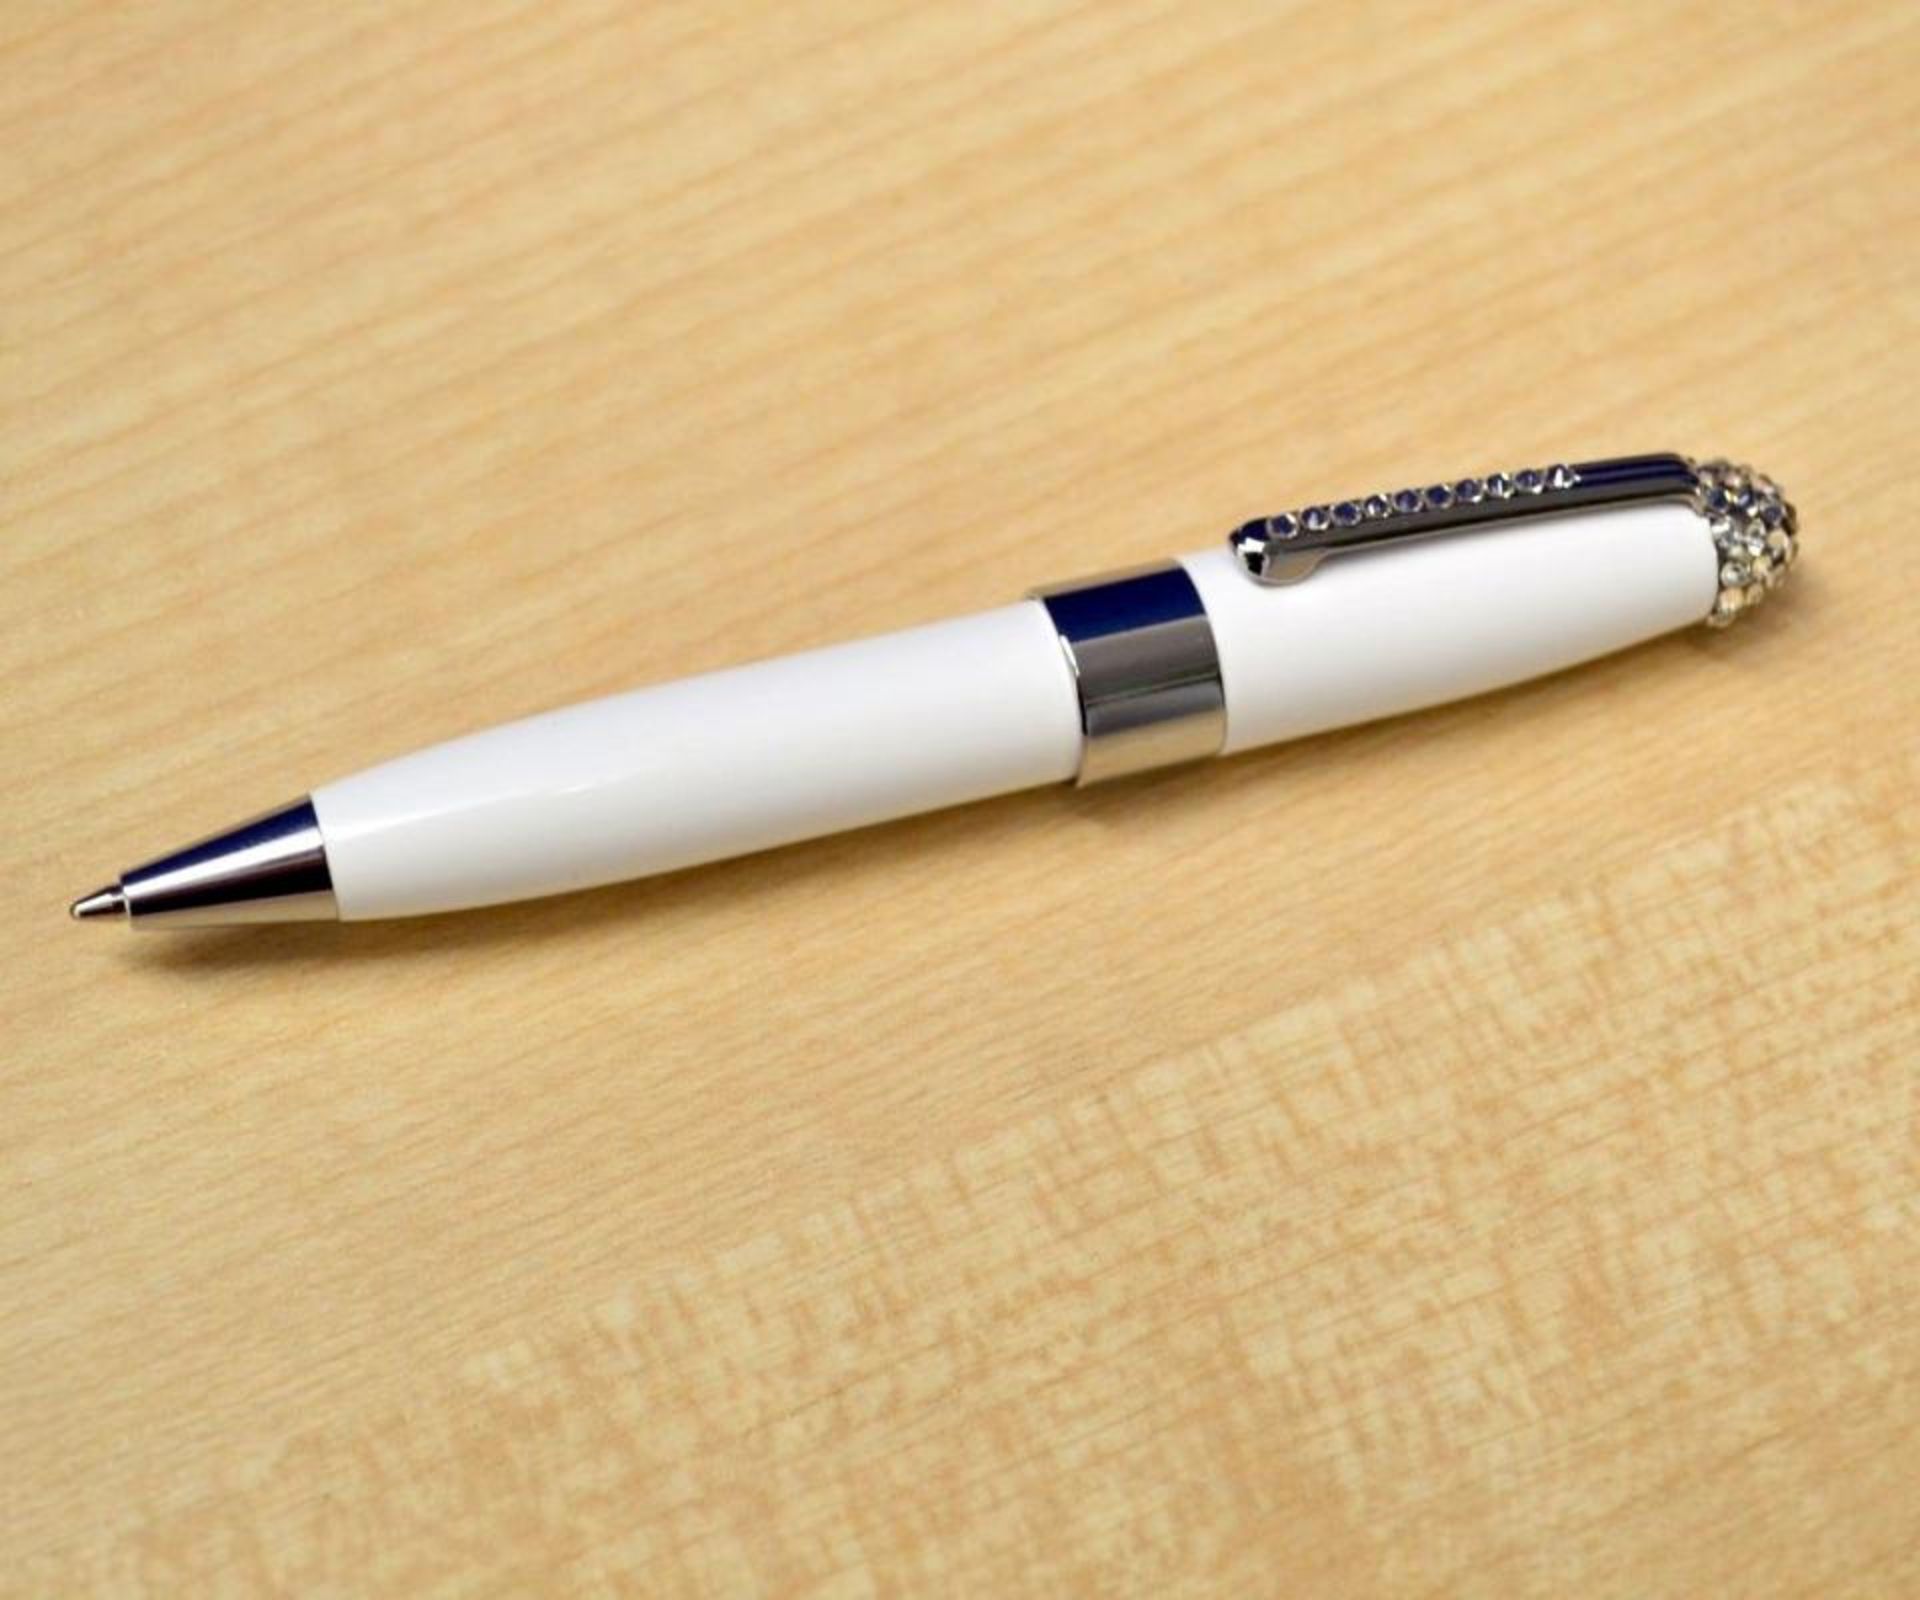 1 x ICE LONDON "Duchess" Ladies Pen Embellished With SWAROVSKI Crystals - Colour: White - Brand - Image 2 of 3